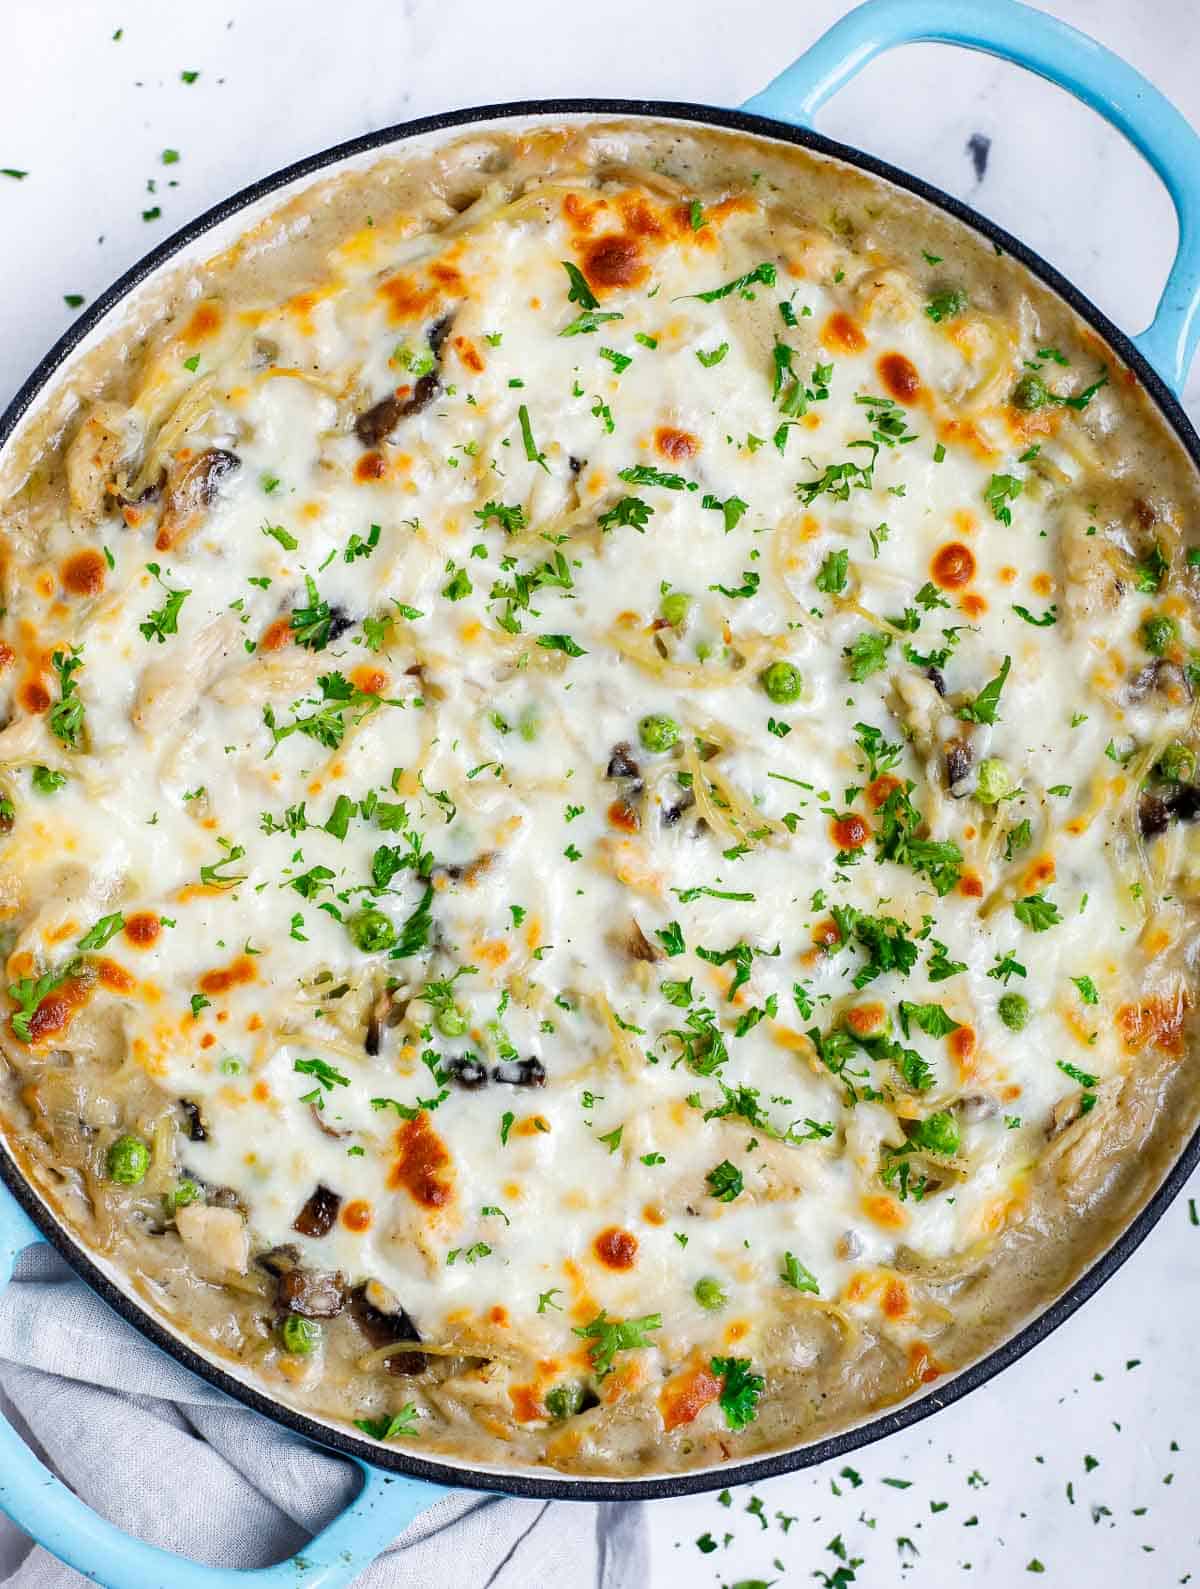 Baked chicken tetrazzini with golden brown cheese on top.